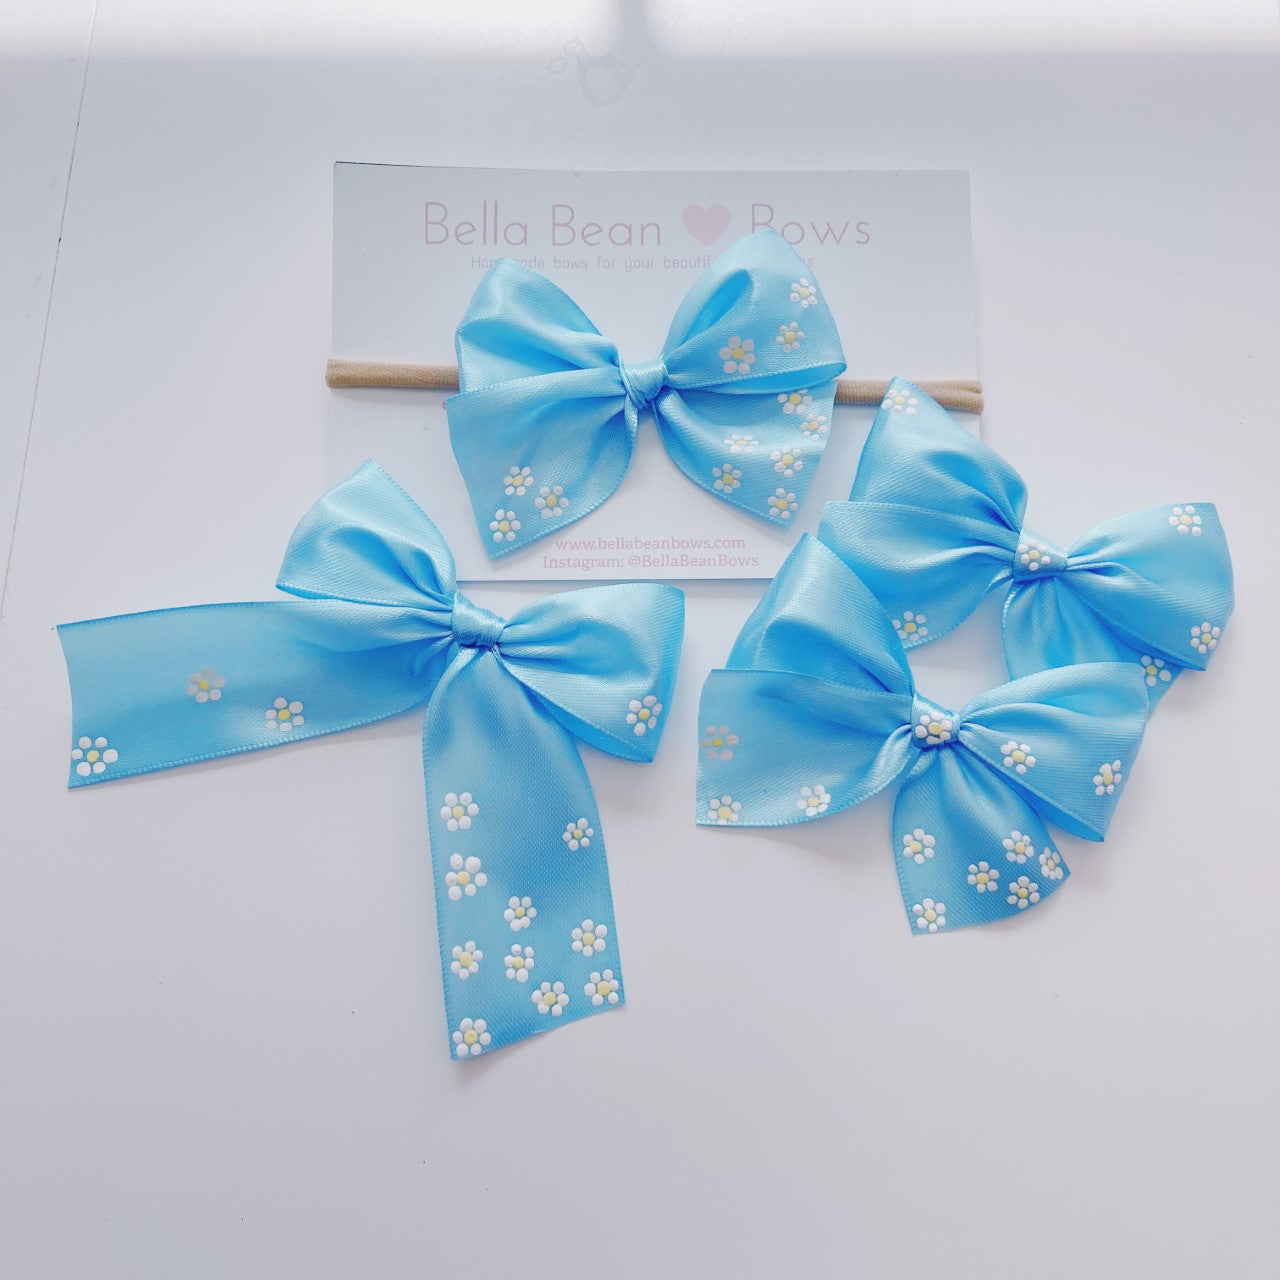 Satin Bow ~ 1.5" // Hand-painted Daisies // Blue-Jay